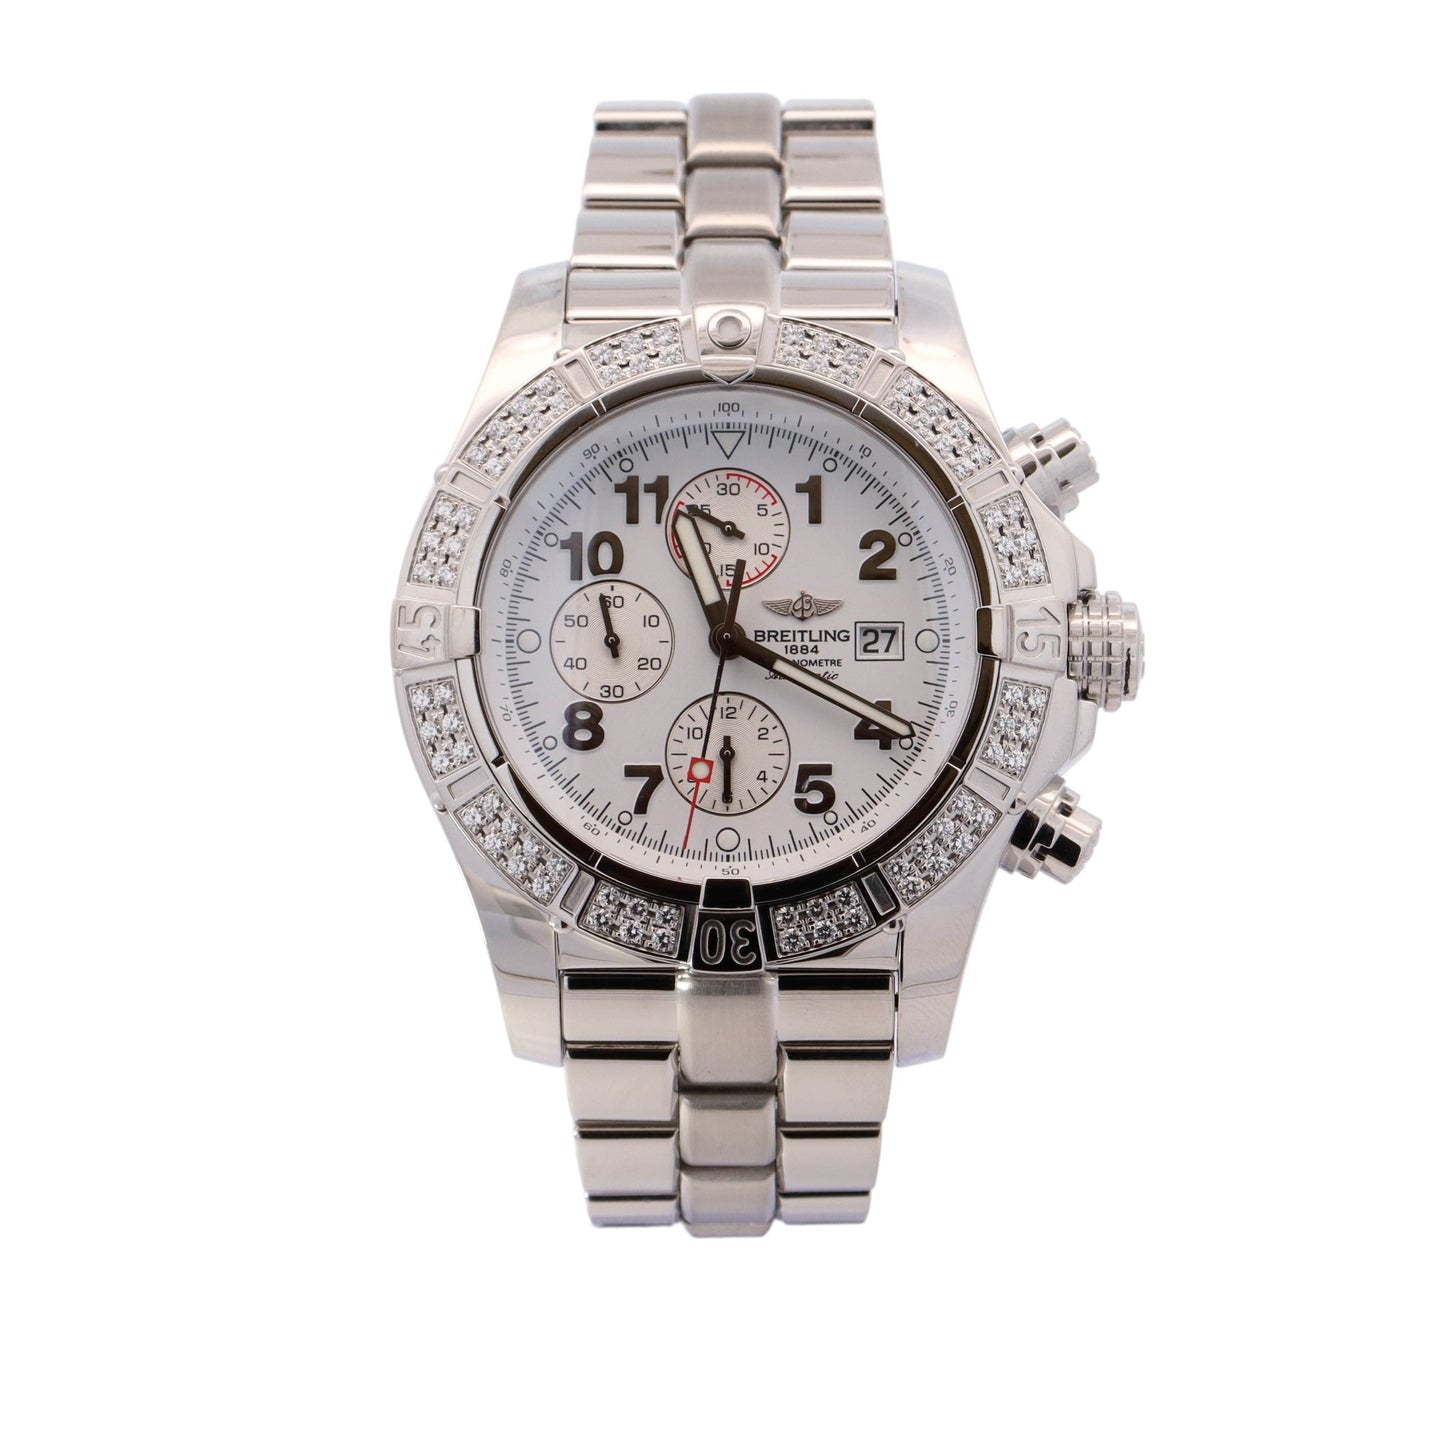 Breitling Super Avenger Stainless Steel 48mm White Chronograph Dial Watch Reference #: A13370 - Happy Jewelers Fine Jewelry Lifetime Warranty